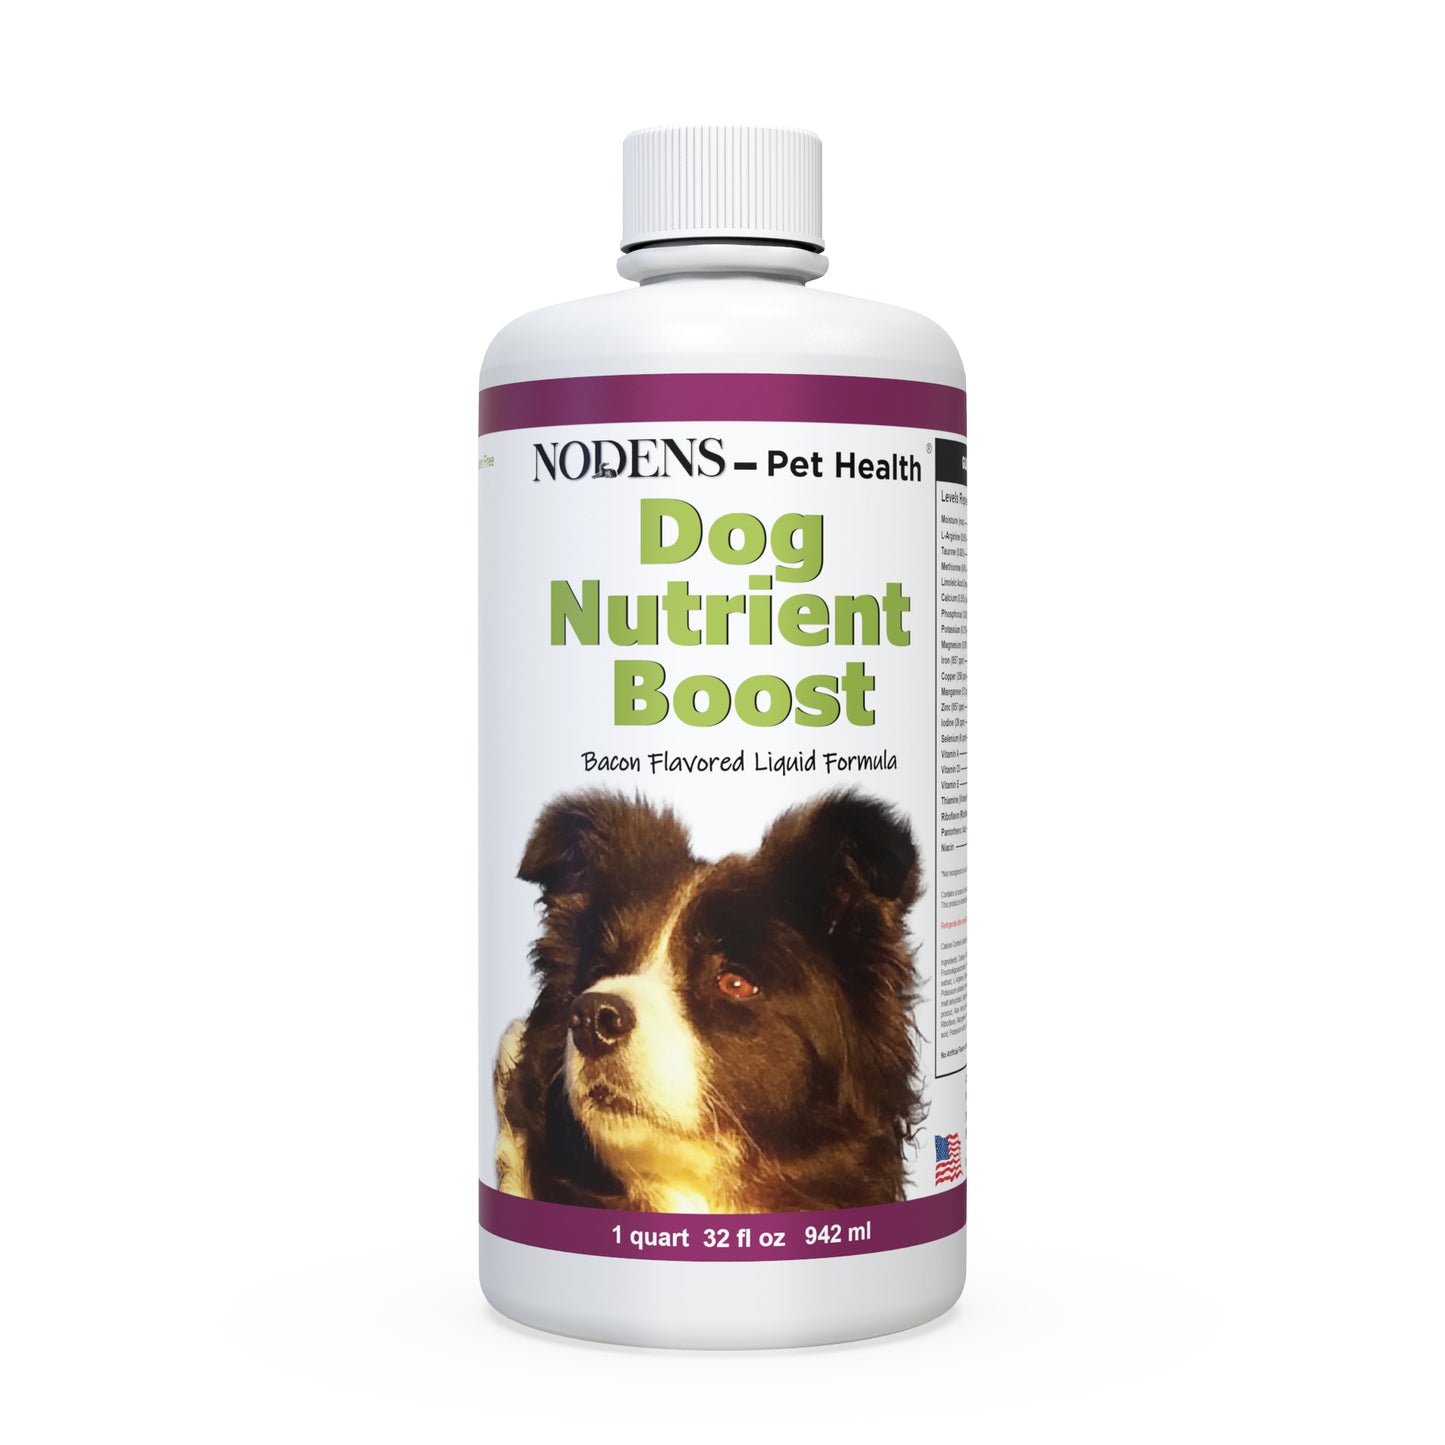 Nodens Nutrient Boost for Dogs Bottle front